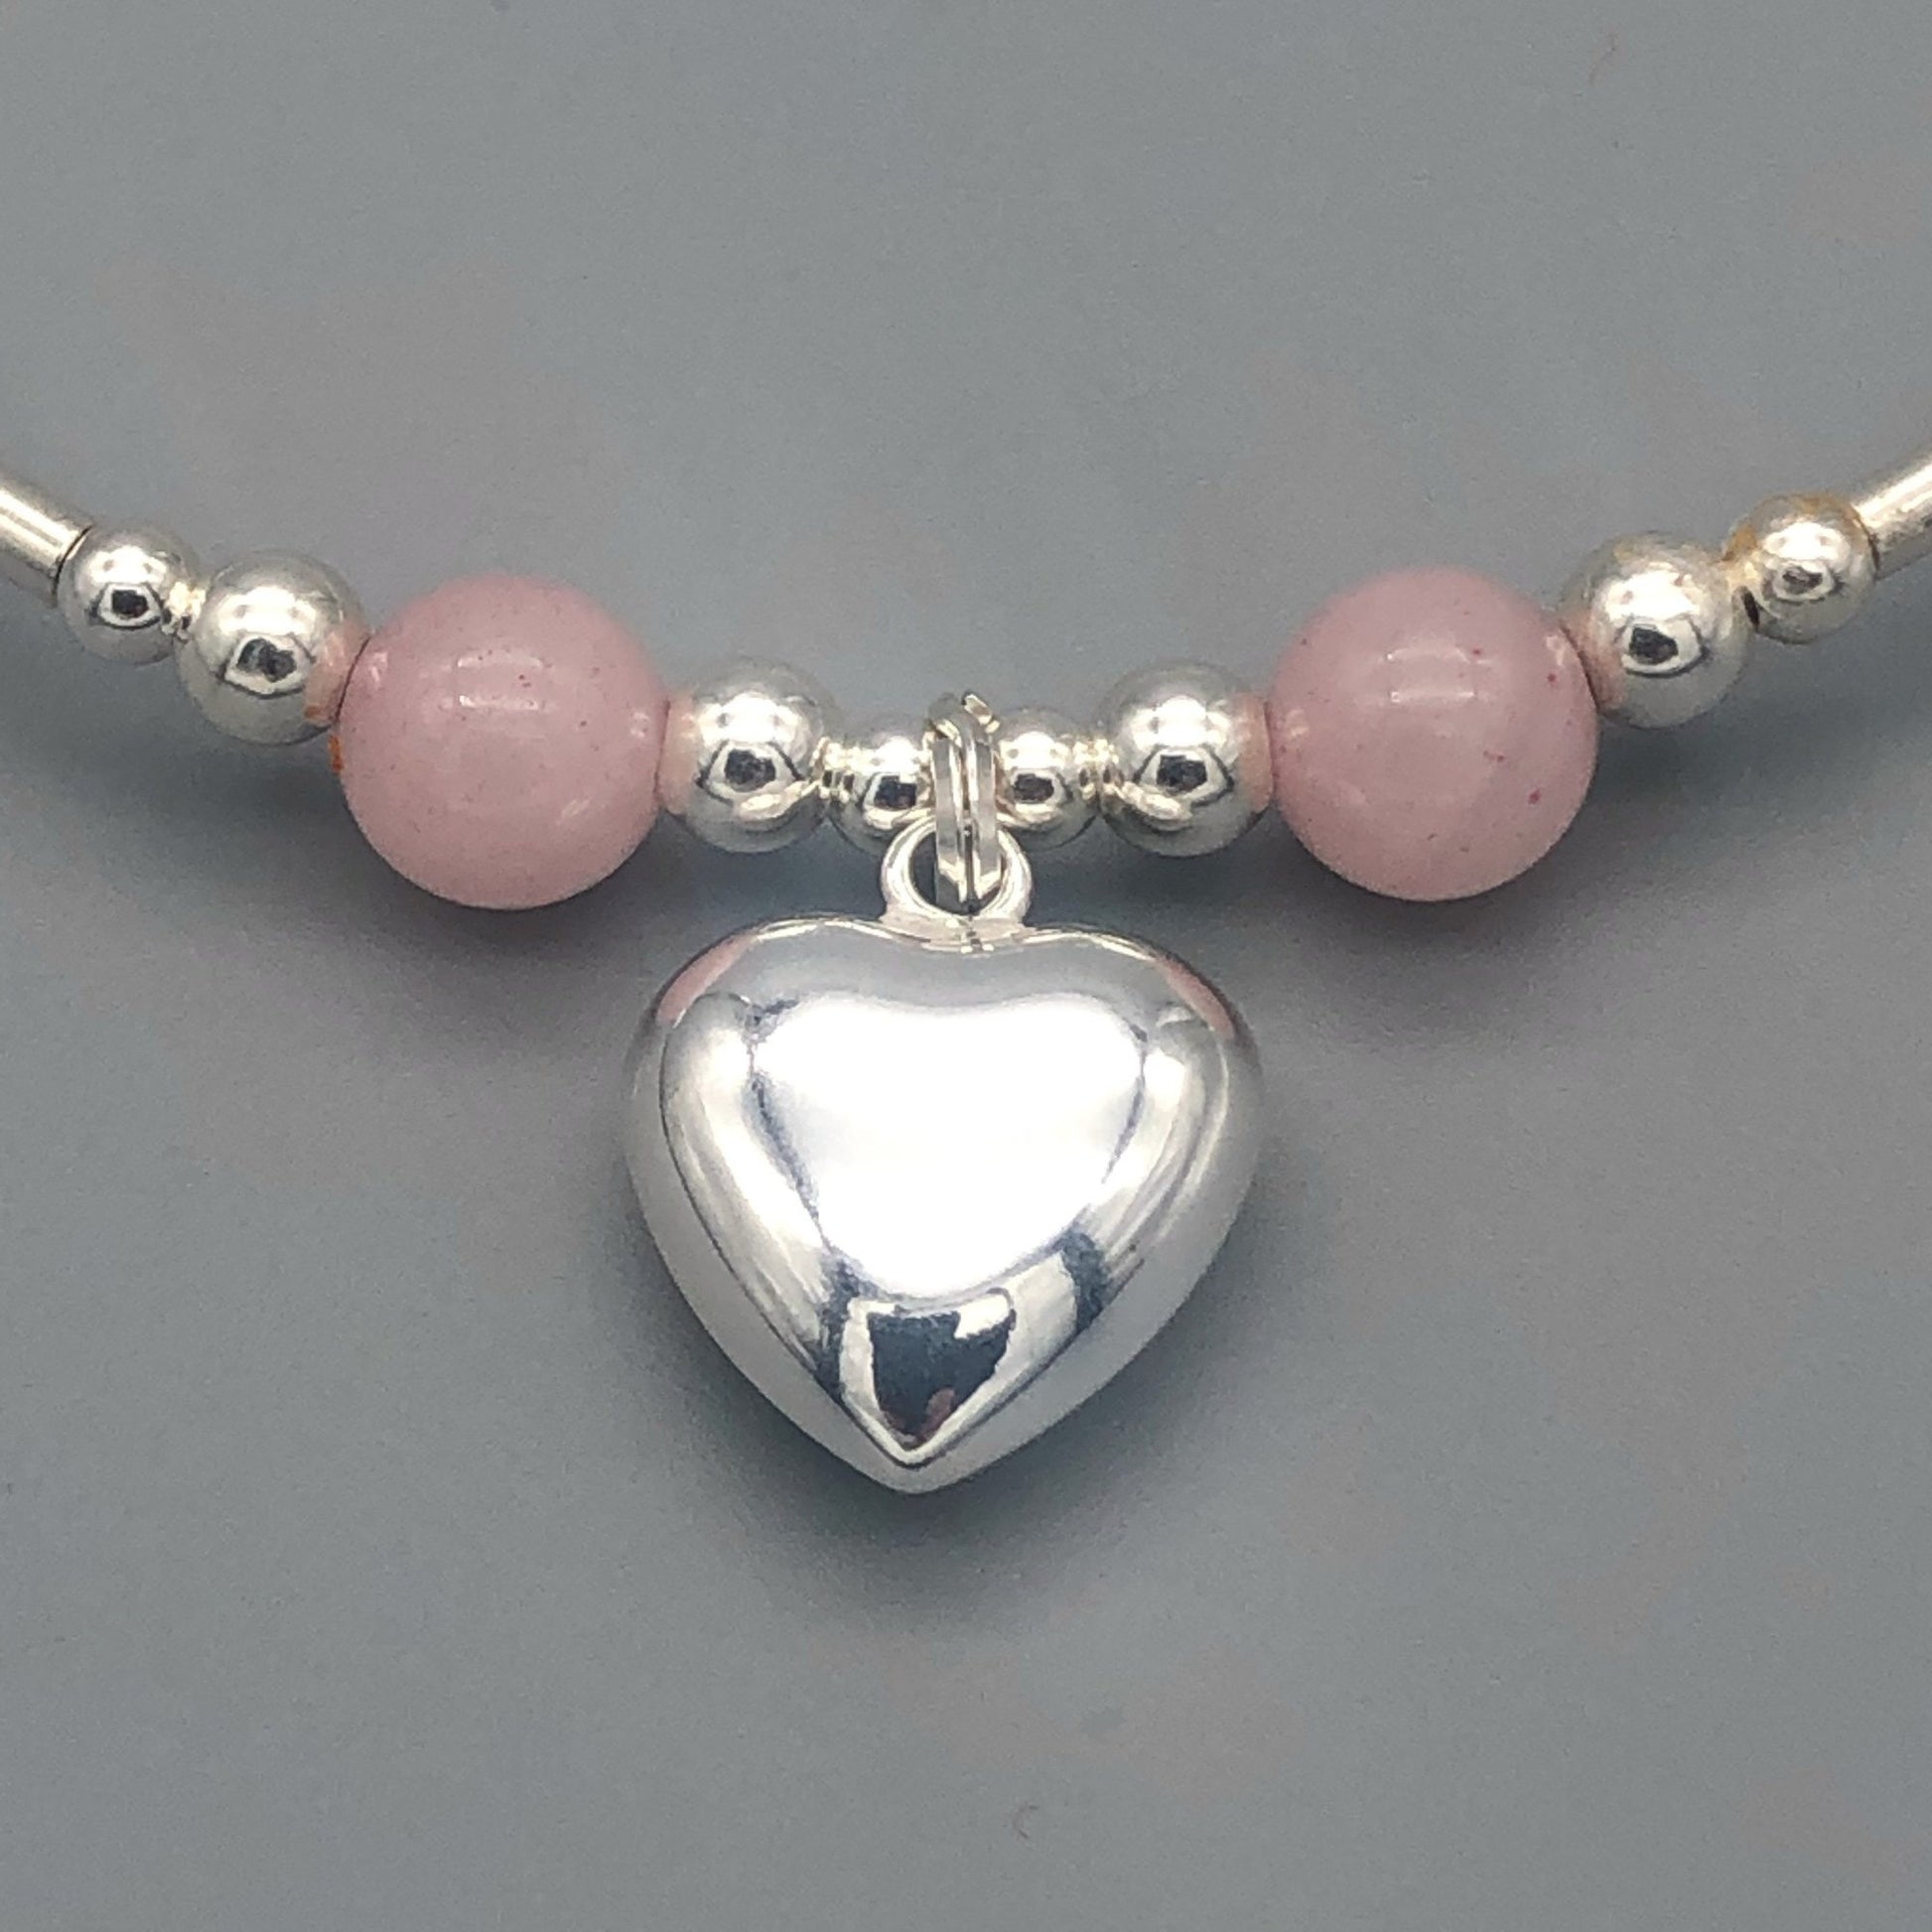 Closeup of Rose quartz solid heart charm sterling silver girl's stacking bracelet